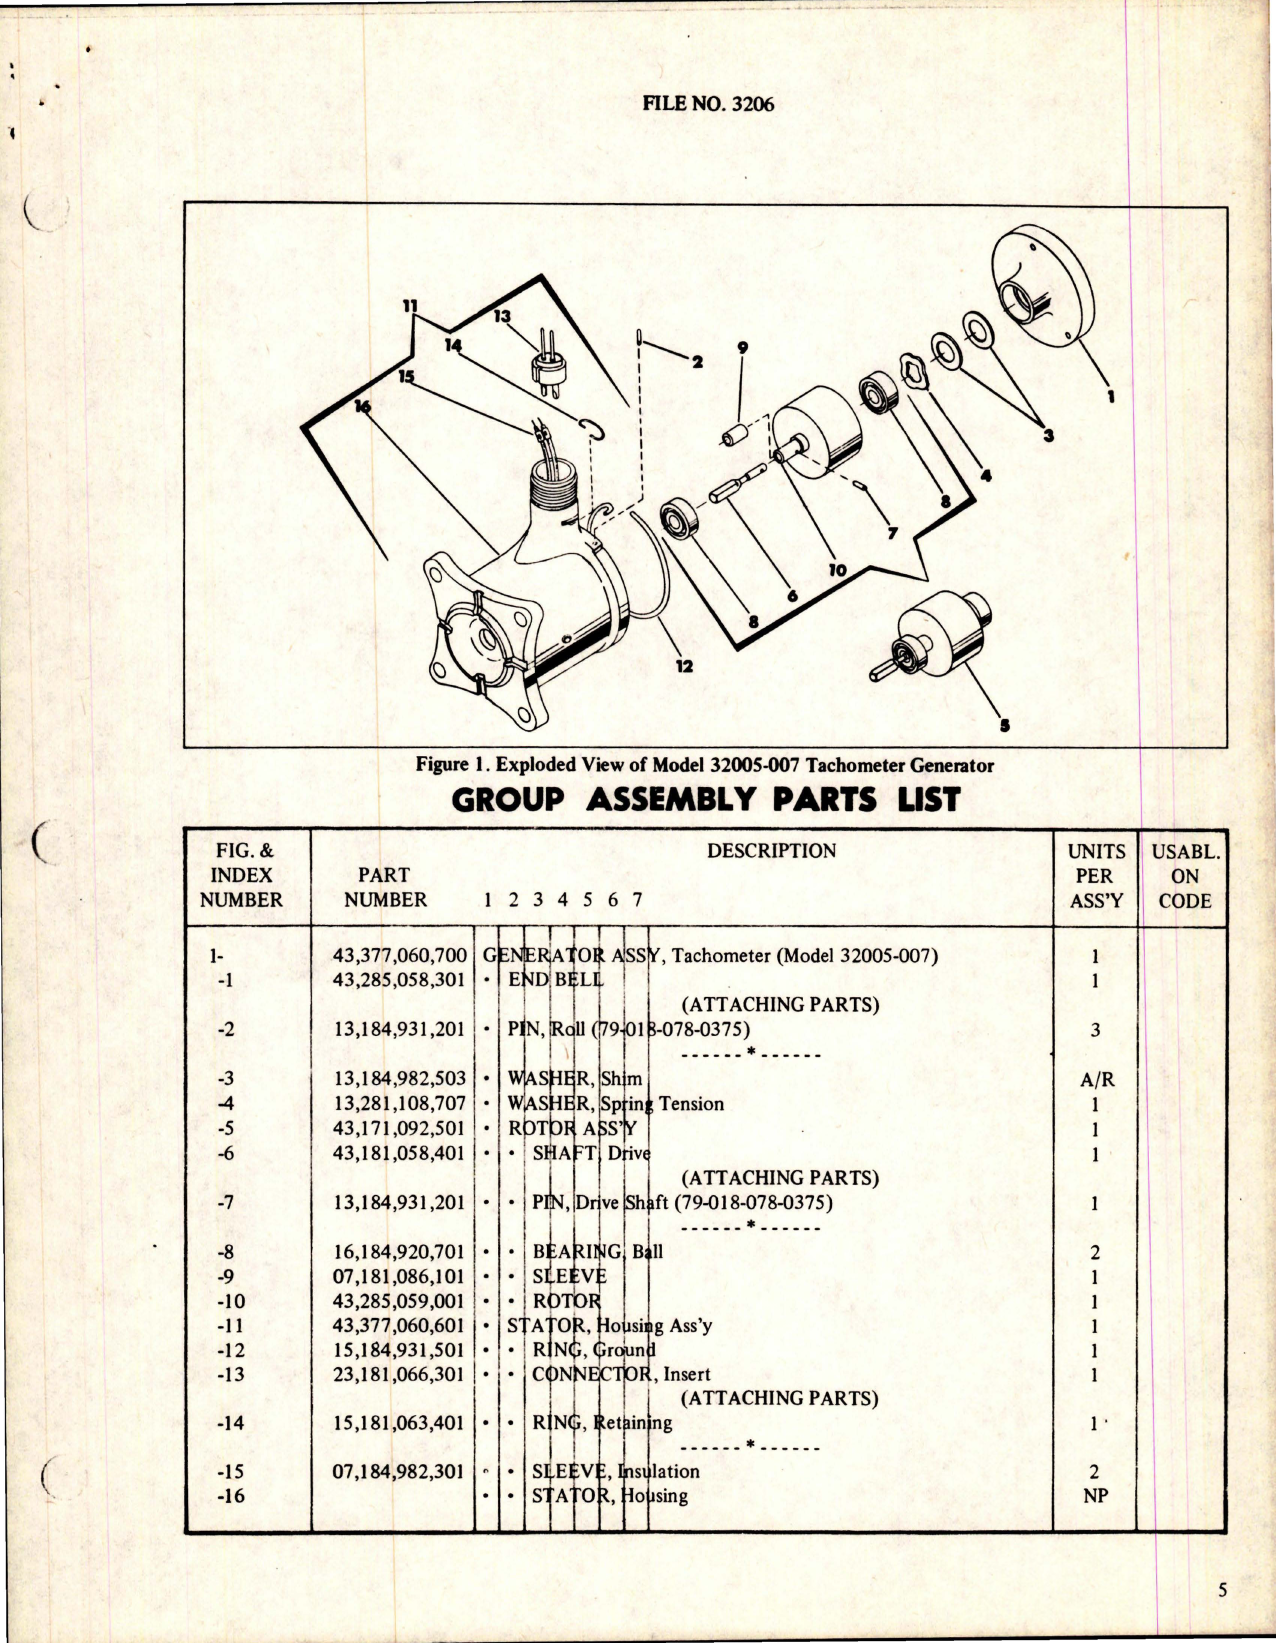 Sample page 7 from AirCorps Library document: Overhaul Instructions with Parts -  for Tachometer Generator - Amendment 1 - Models 32005-007 and 32005-008 